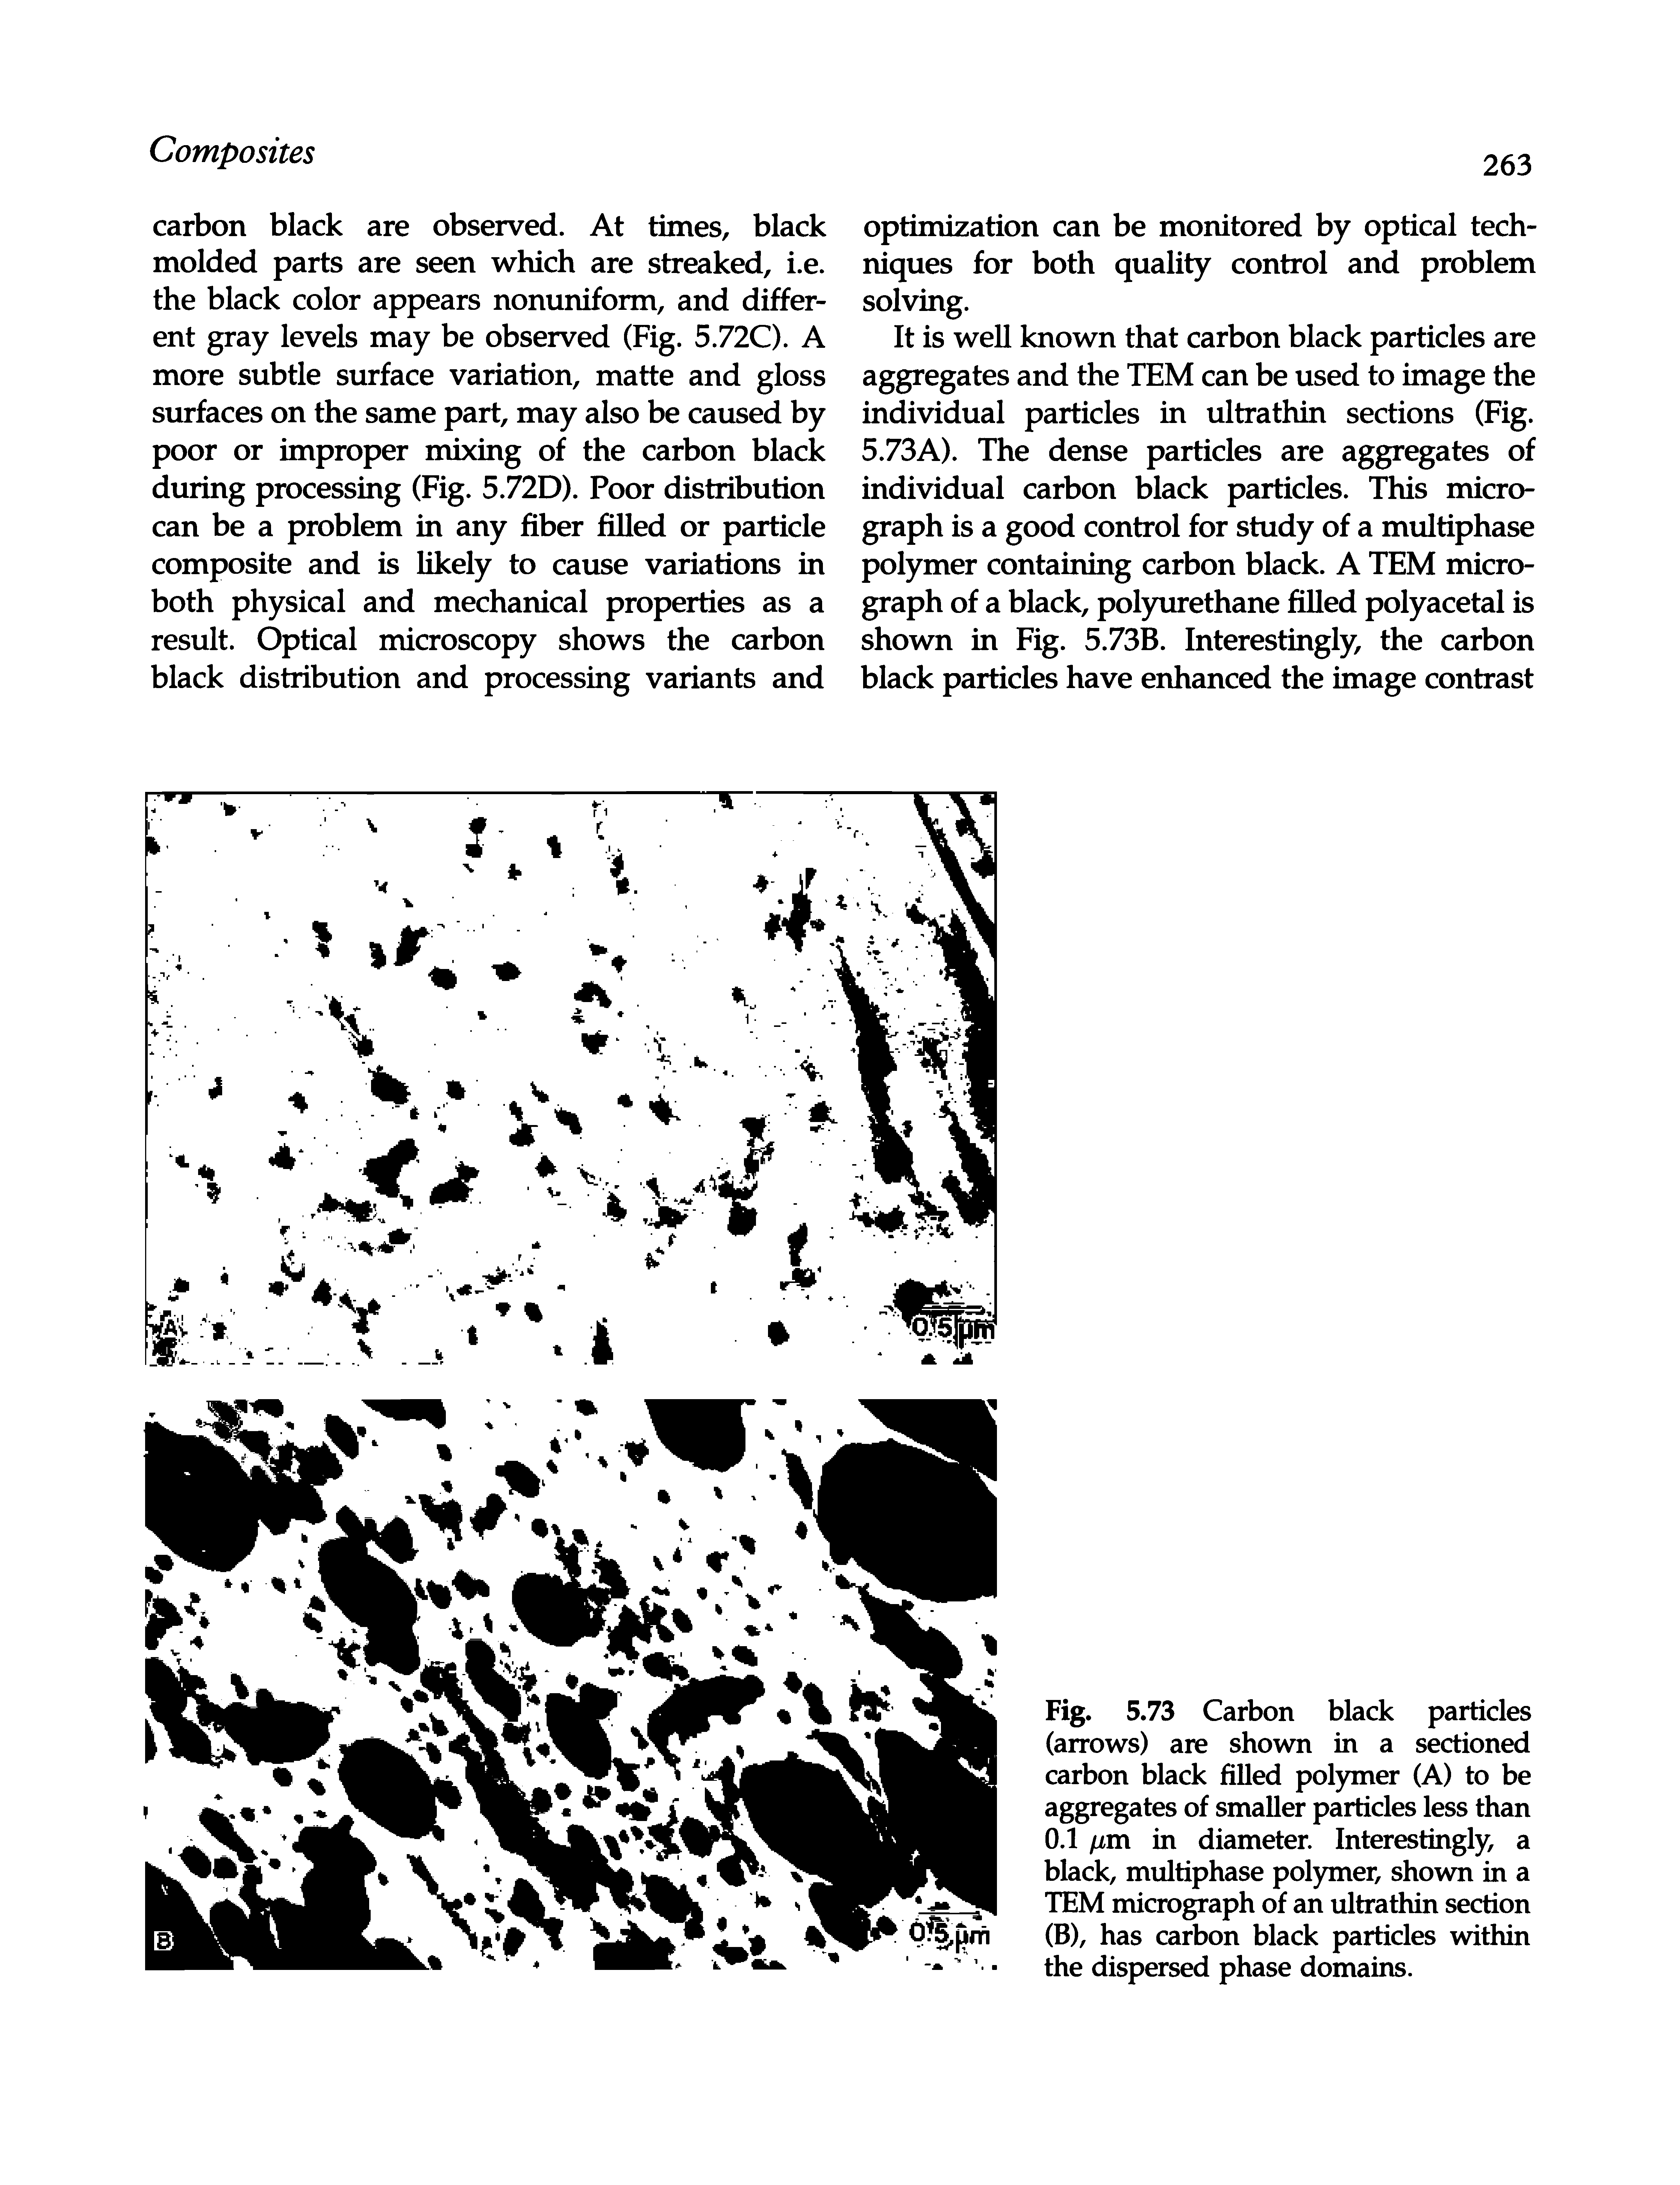 Fig. 5.73 Carbon black particles (arrows) are shown in a sectioned carbon black filled polymer (A) to be aggregates of smaller particles less than 0.1 iim in diameter. Interestingly, a black, multiphase pol)nner, shown in a TEM micrograph of an ultrathin section (B), has carbon black particles within the dispersed phase domains.